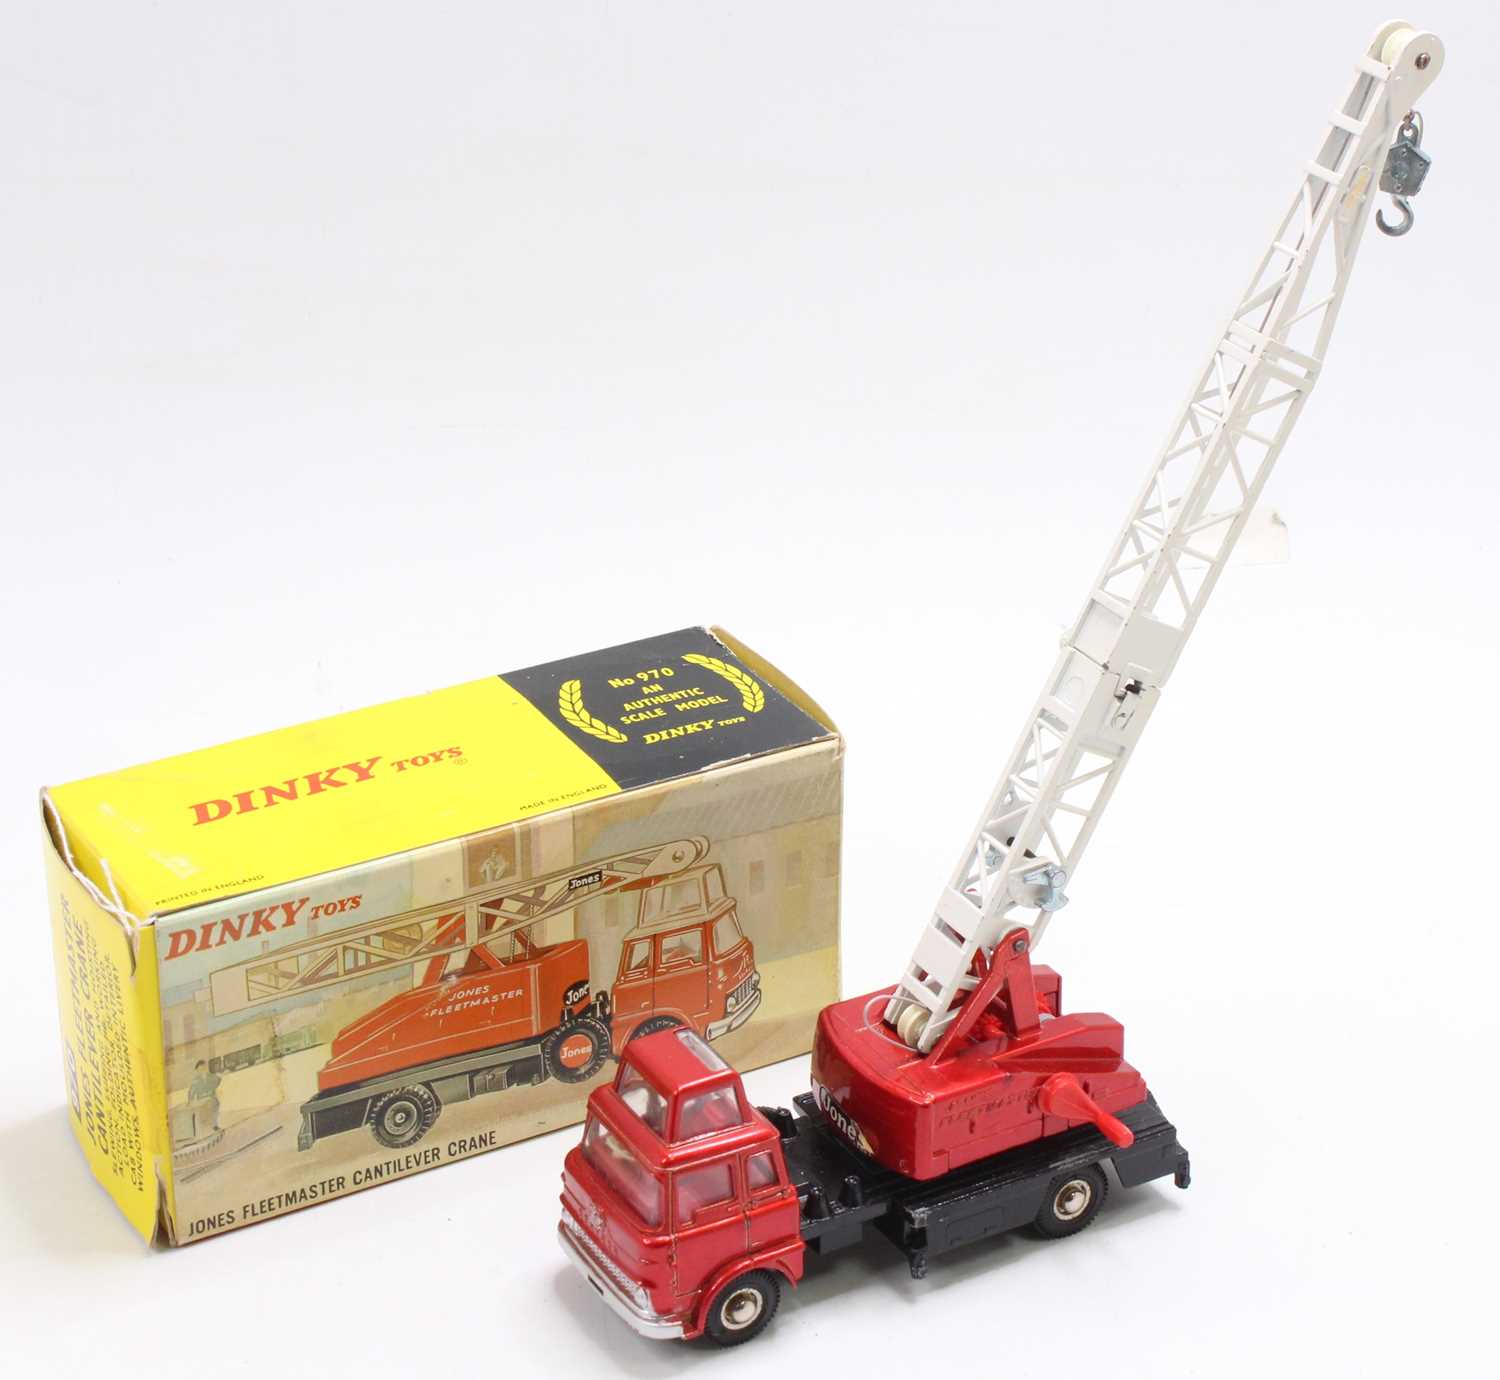 Dinky Toys No. 970 Jones Fleetmaster cantilever crane, comprising metallic red and gloss black - Image 3 of 5